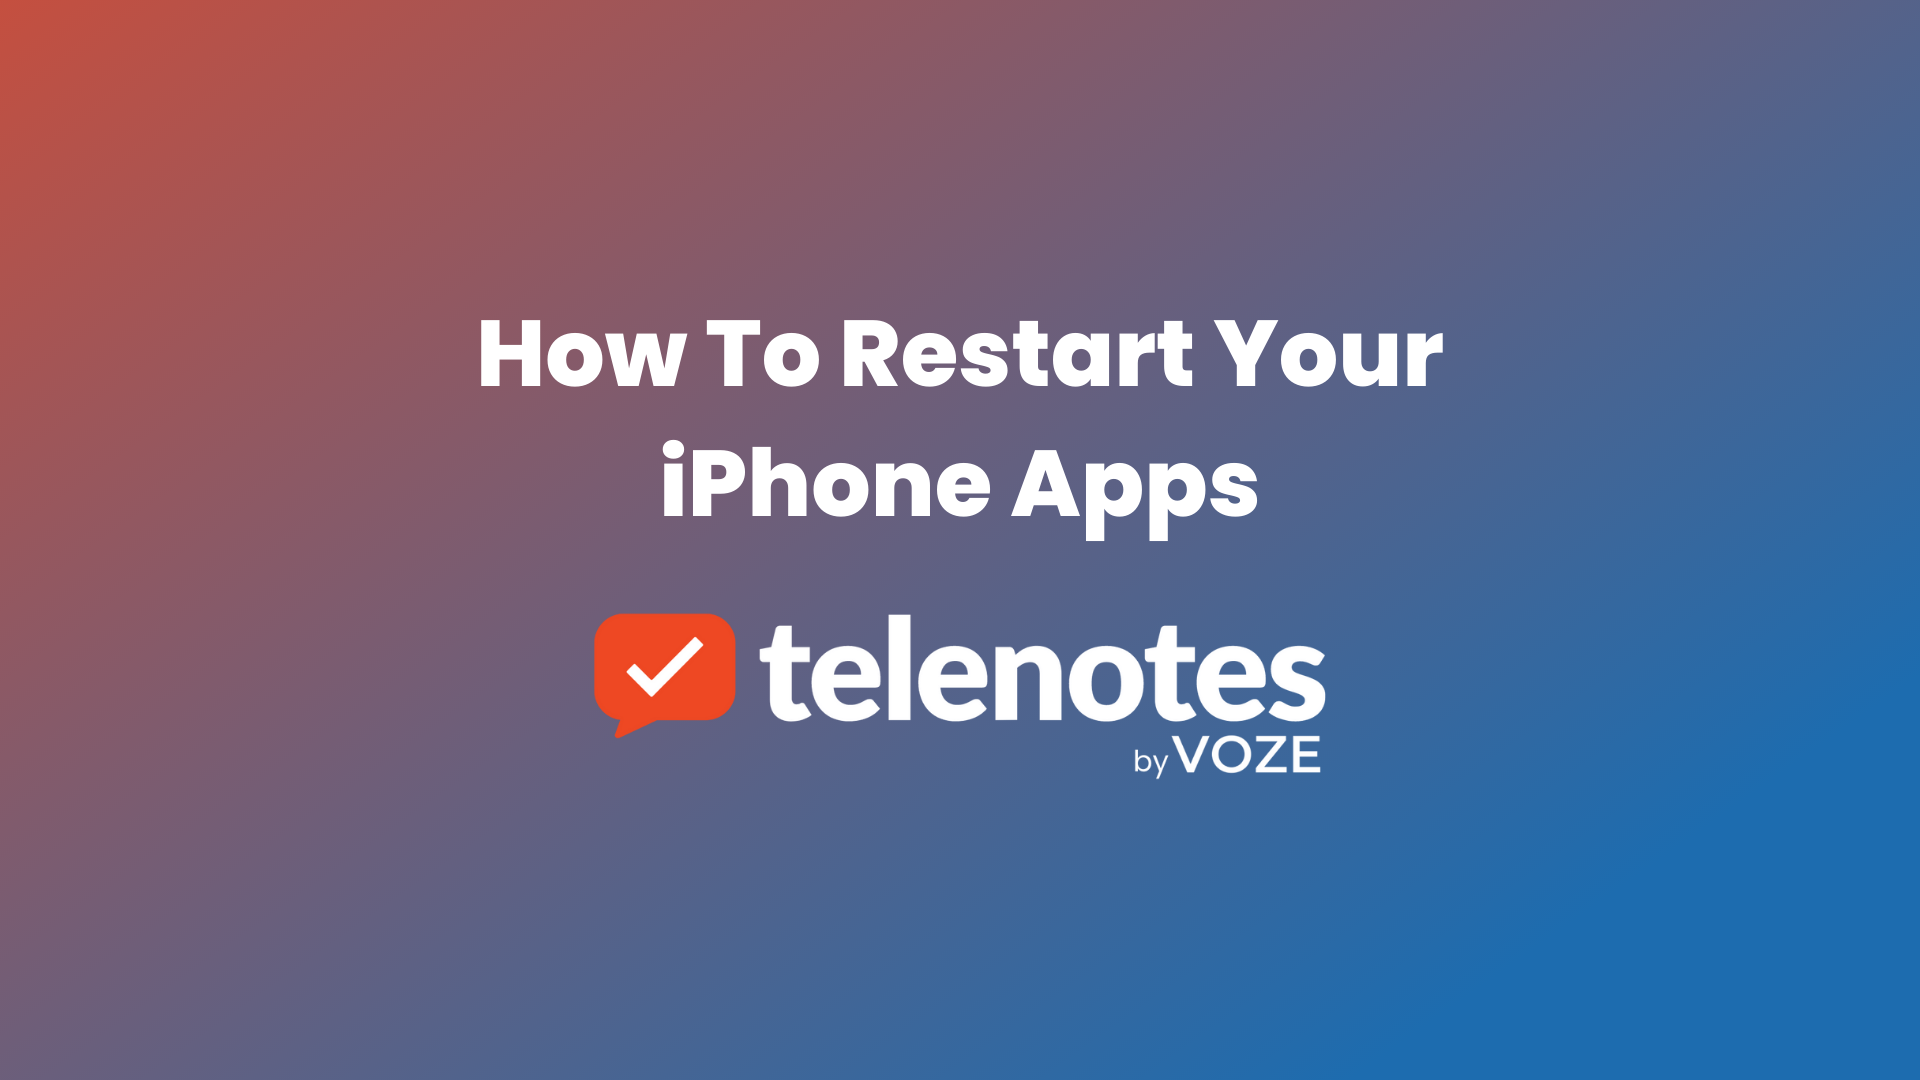 How To Restart Your iPhone Apps